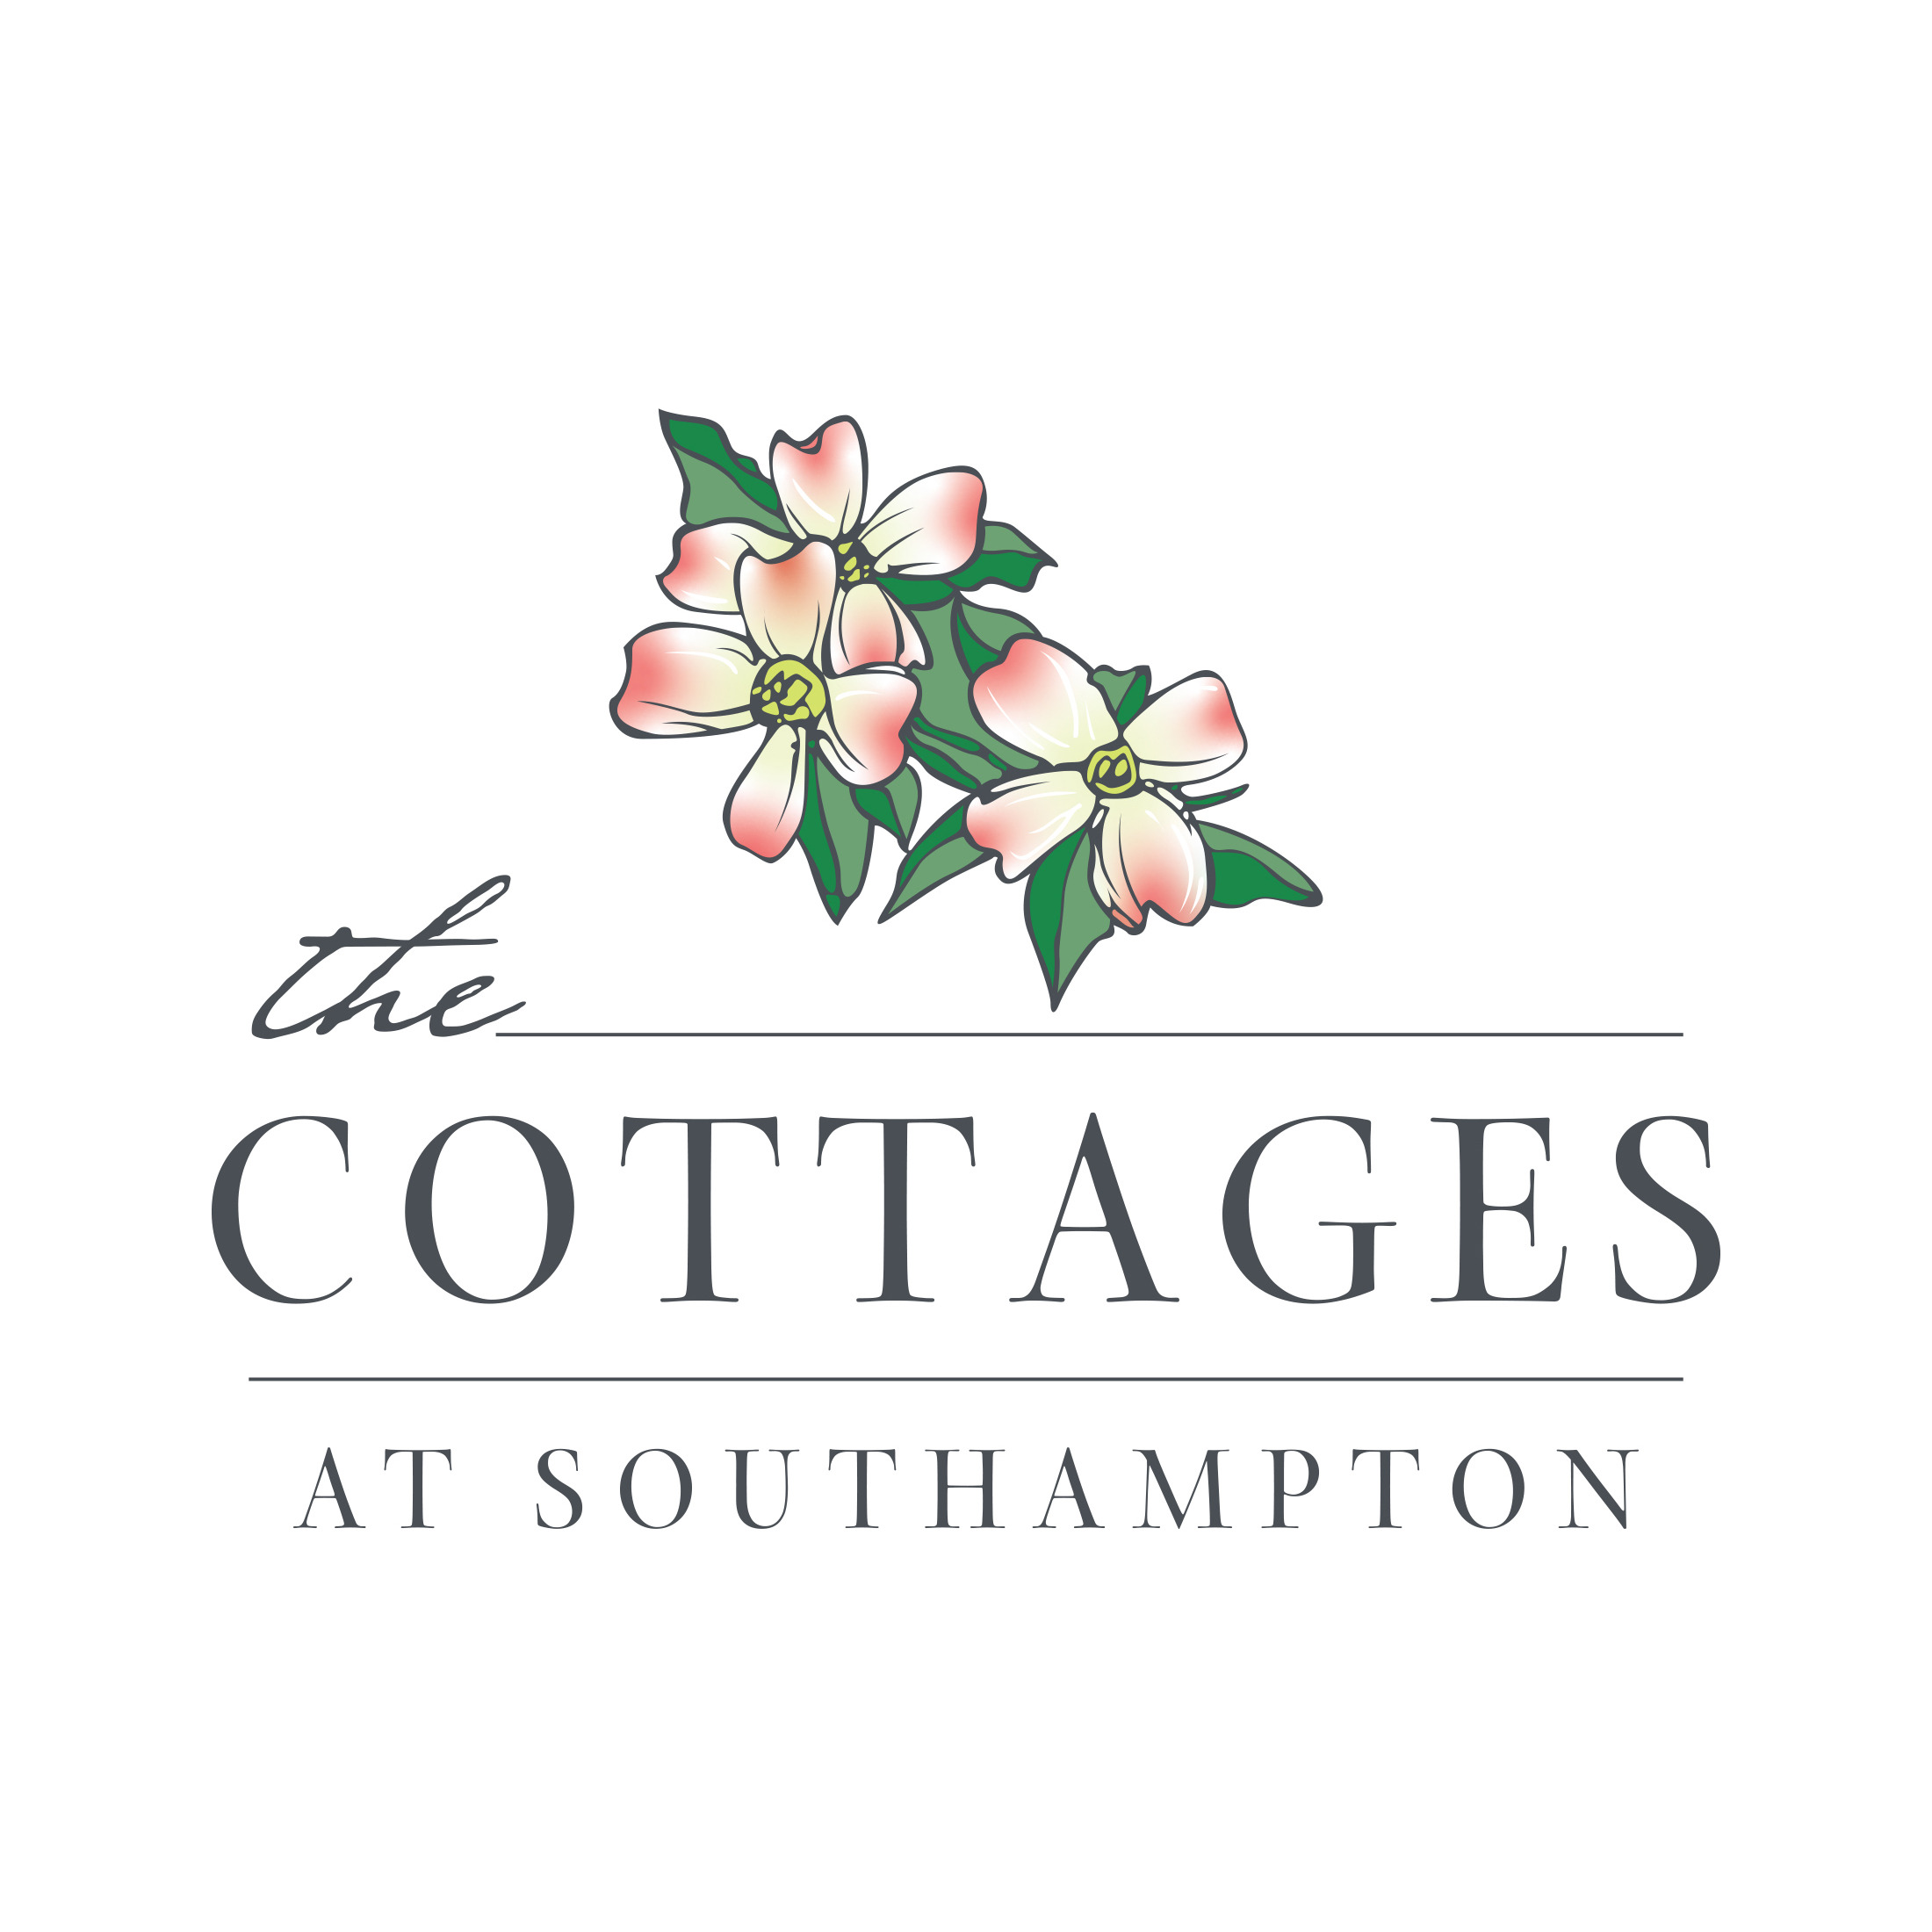 The Cottages at Southampton